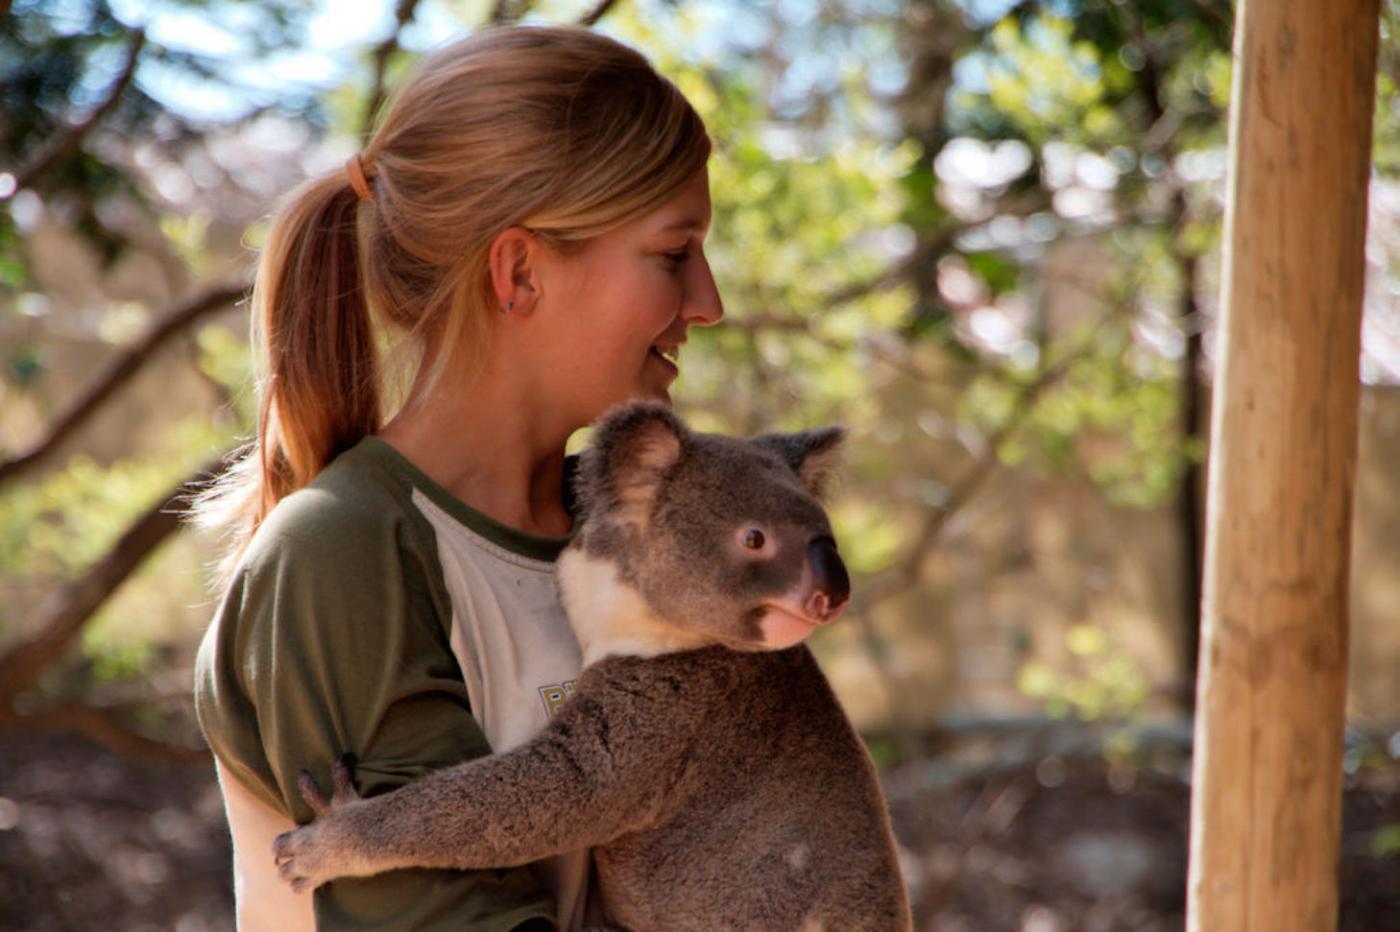 The opportunity to snuggle koalas is just one bonus of a working holiday in Australia. 